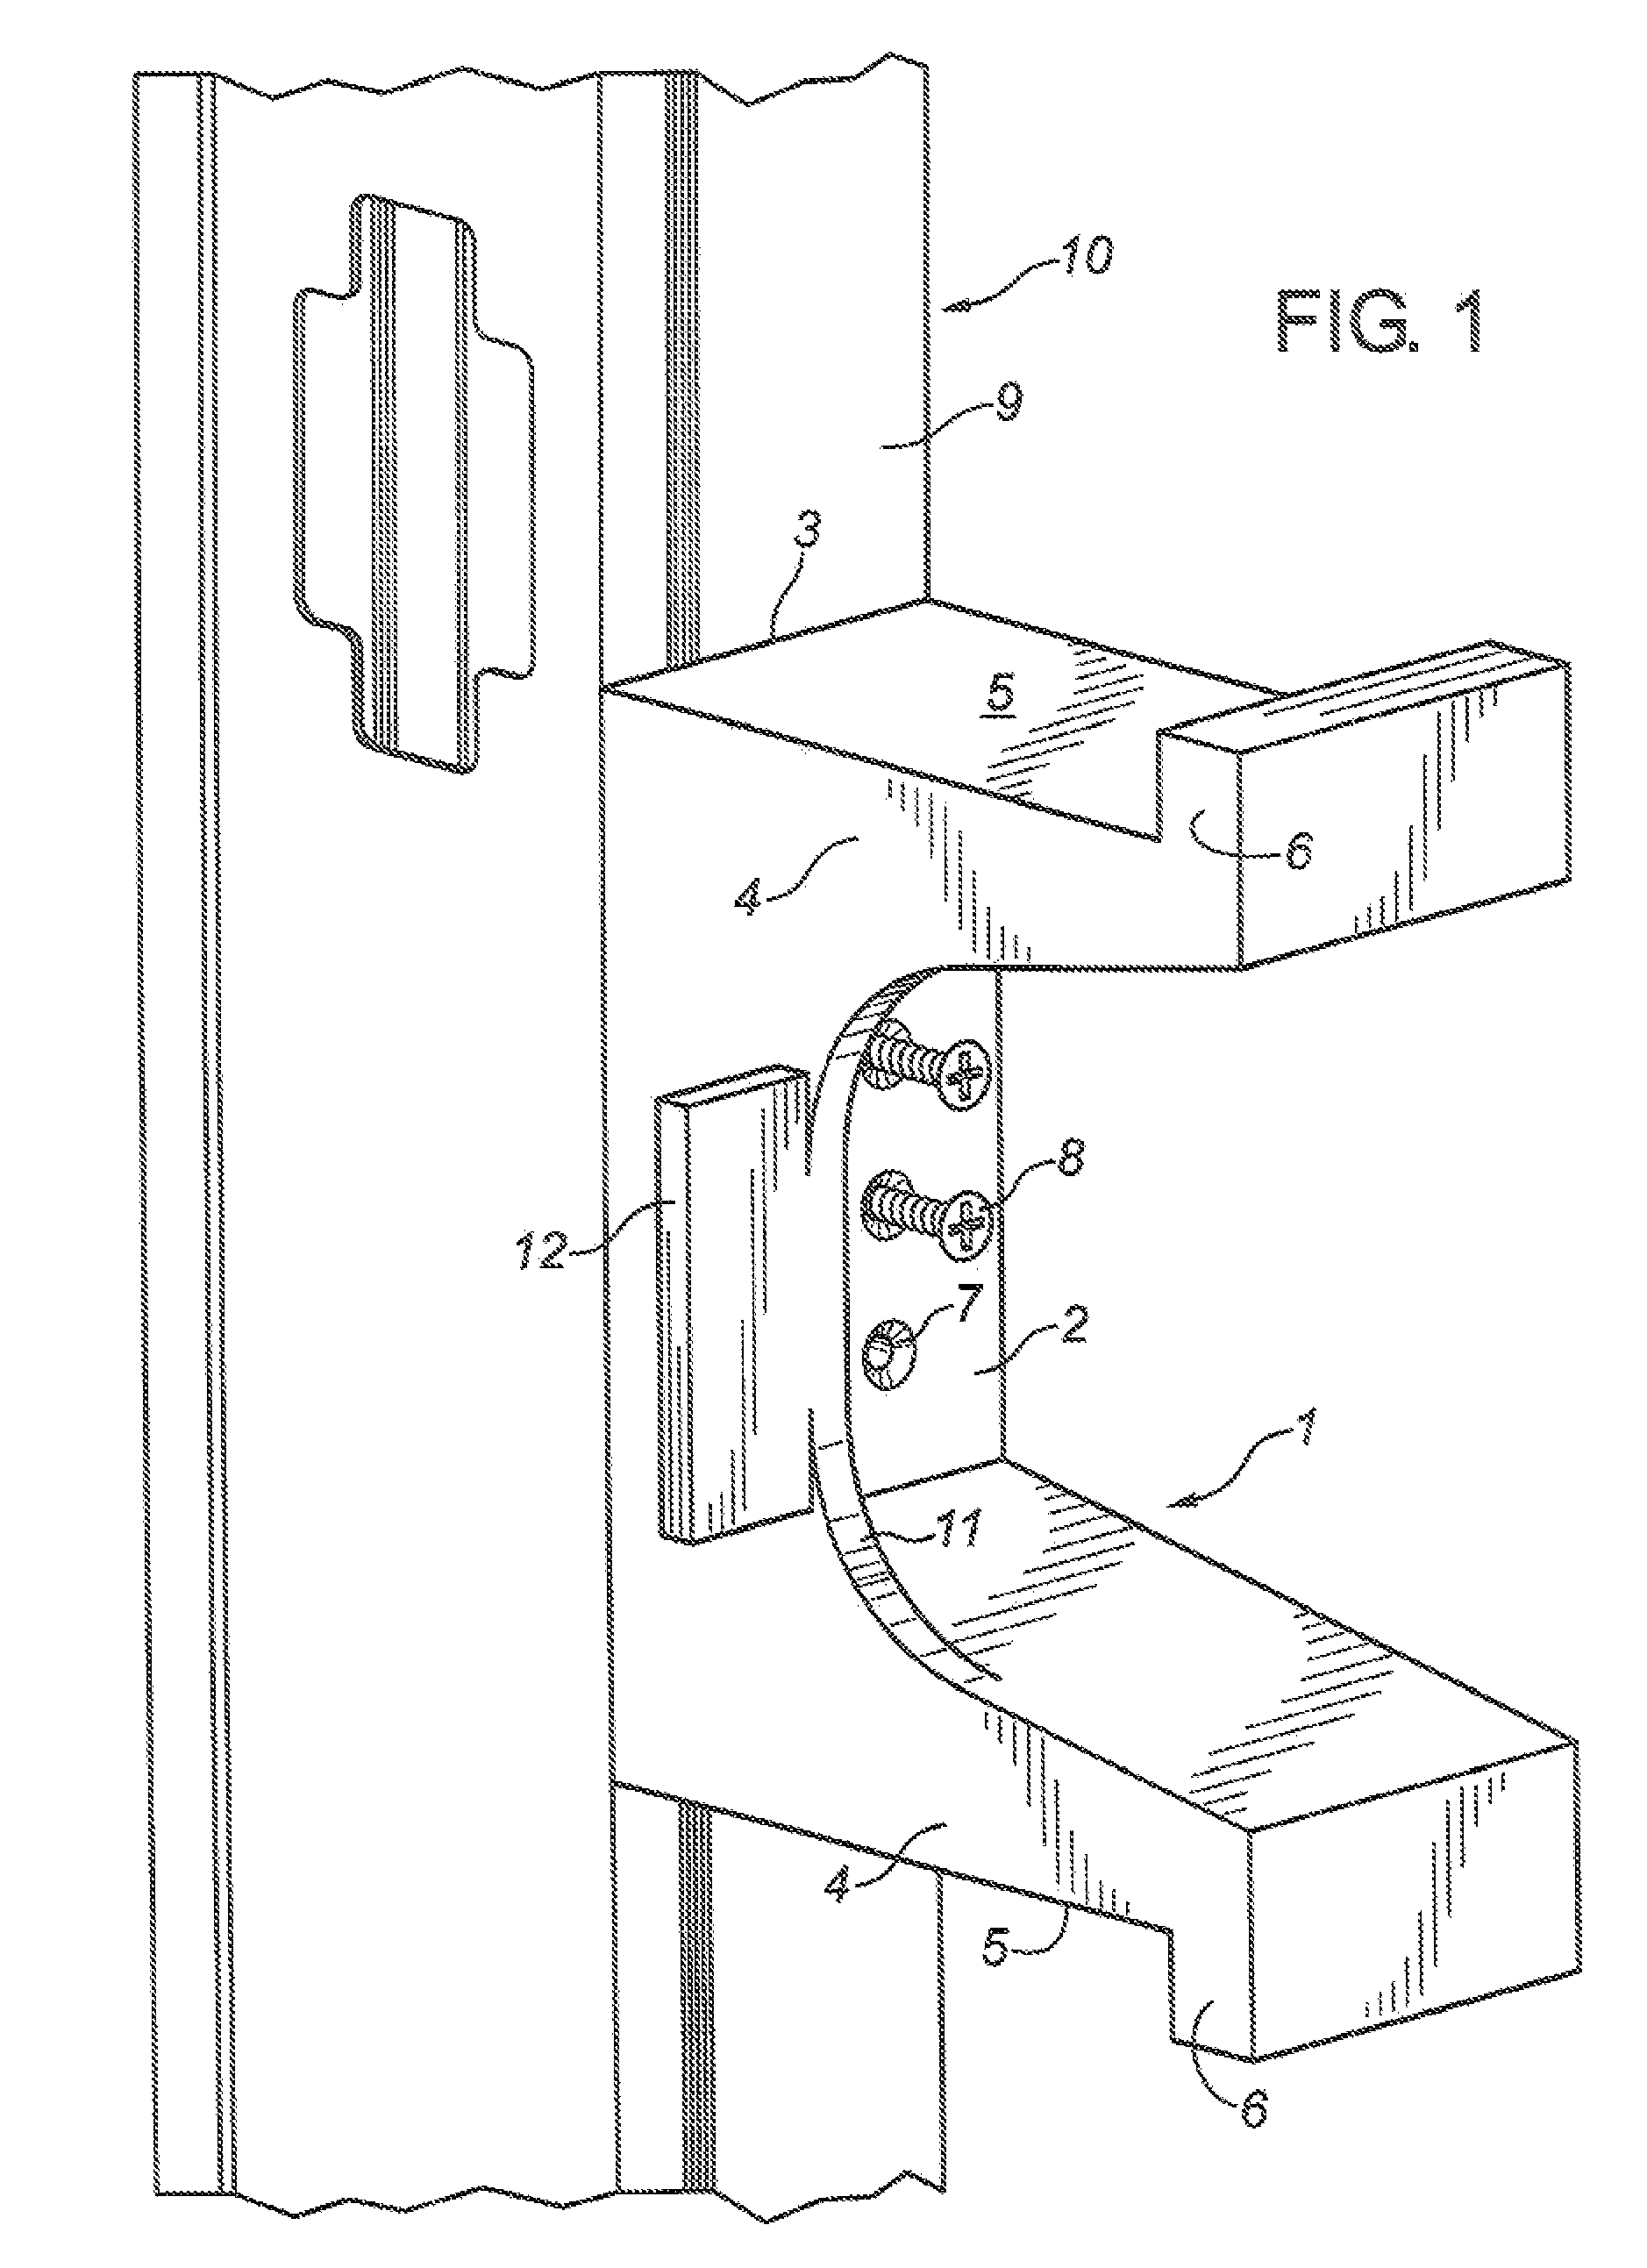 Support bracket to suspend sheet material for a wall